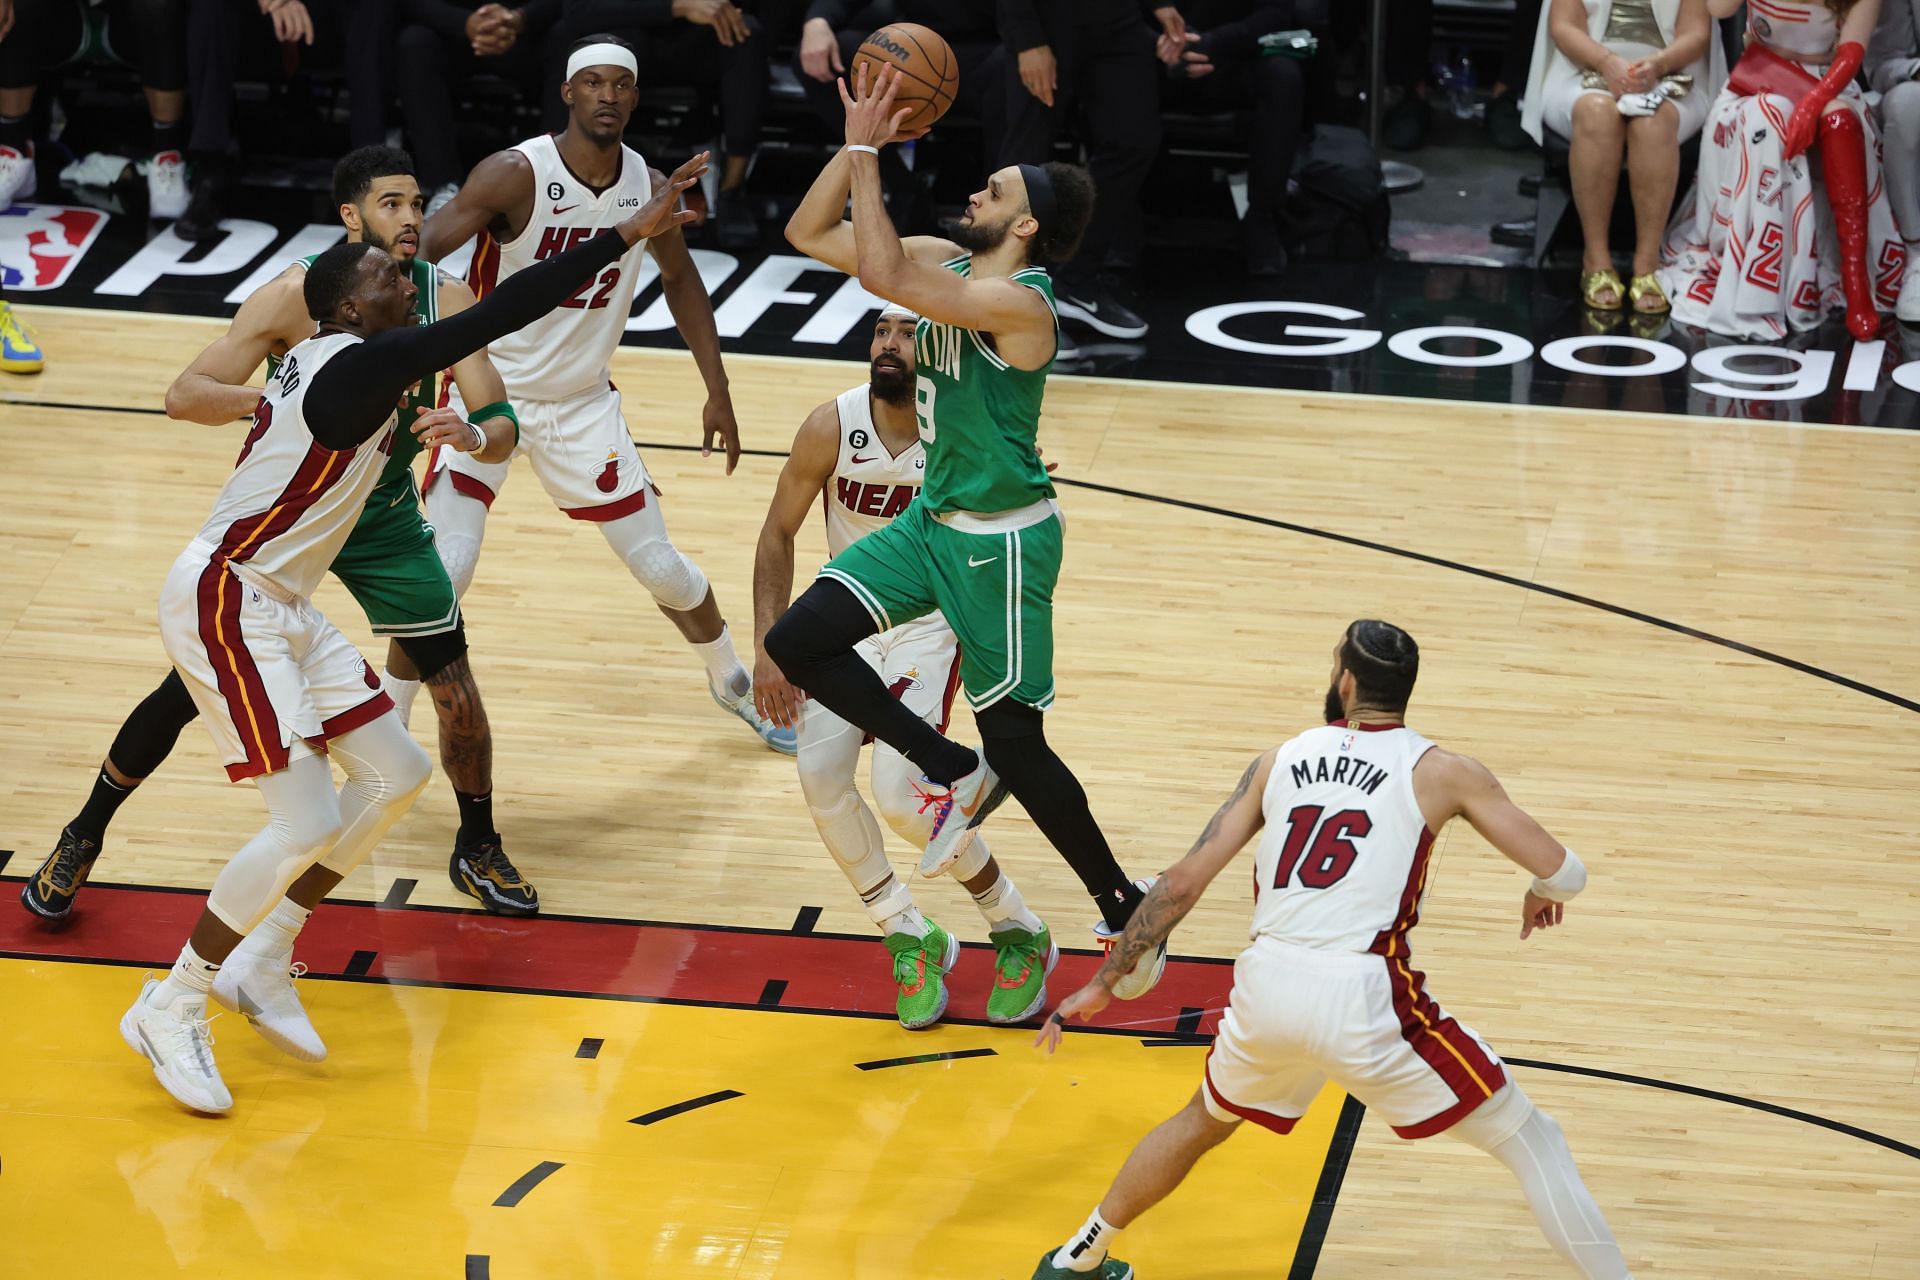 The Celtics will play Game 7 in front of their crowd (Image via Getty Images)